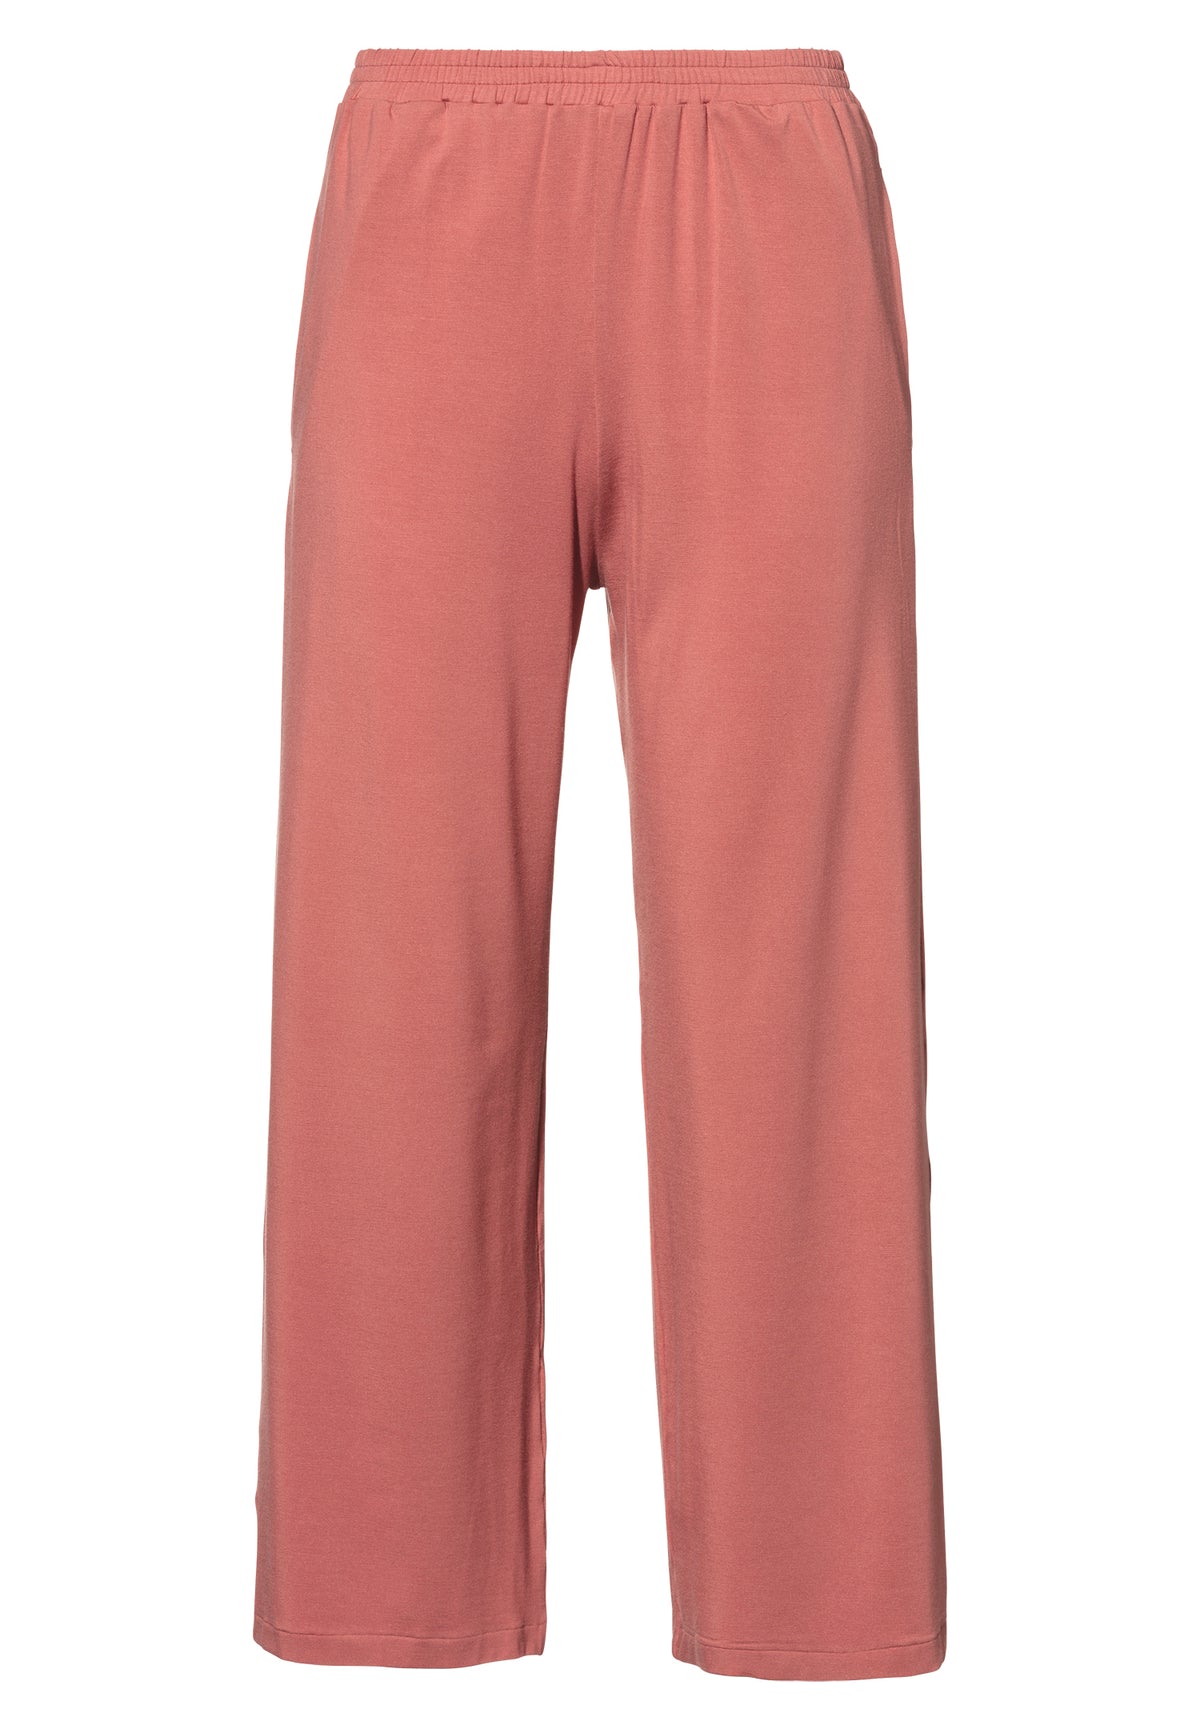 Pureness | Pants Cropped - coral rouge